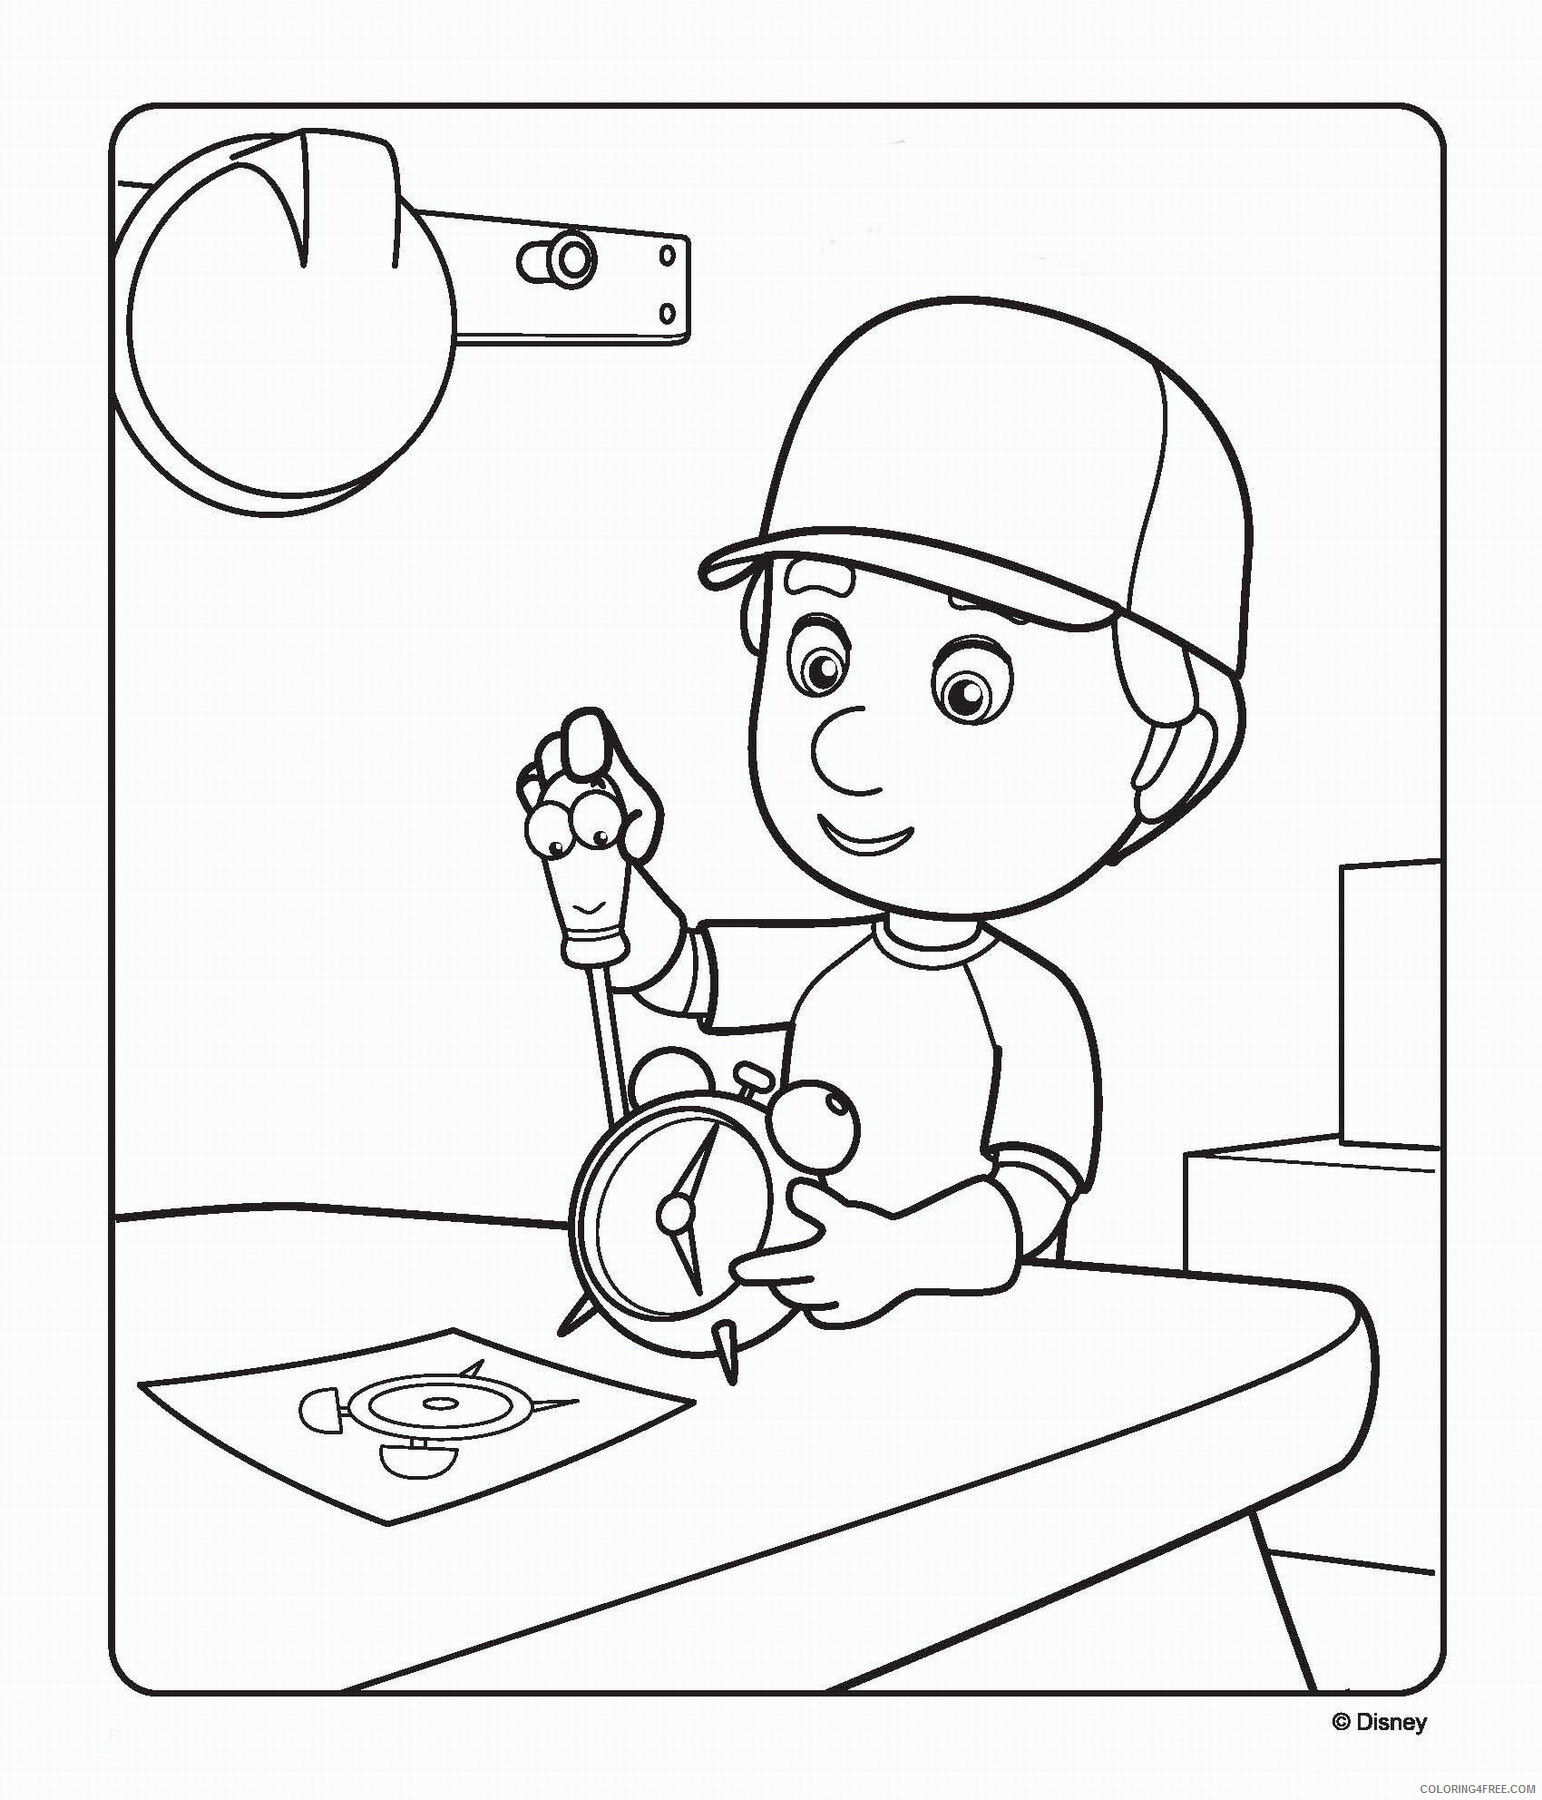 Bob the Builder Coloring Pages TV Film bob the builder_39 Printable 2020 00988 Coloring4free